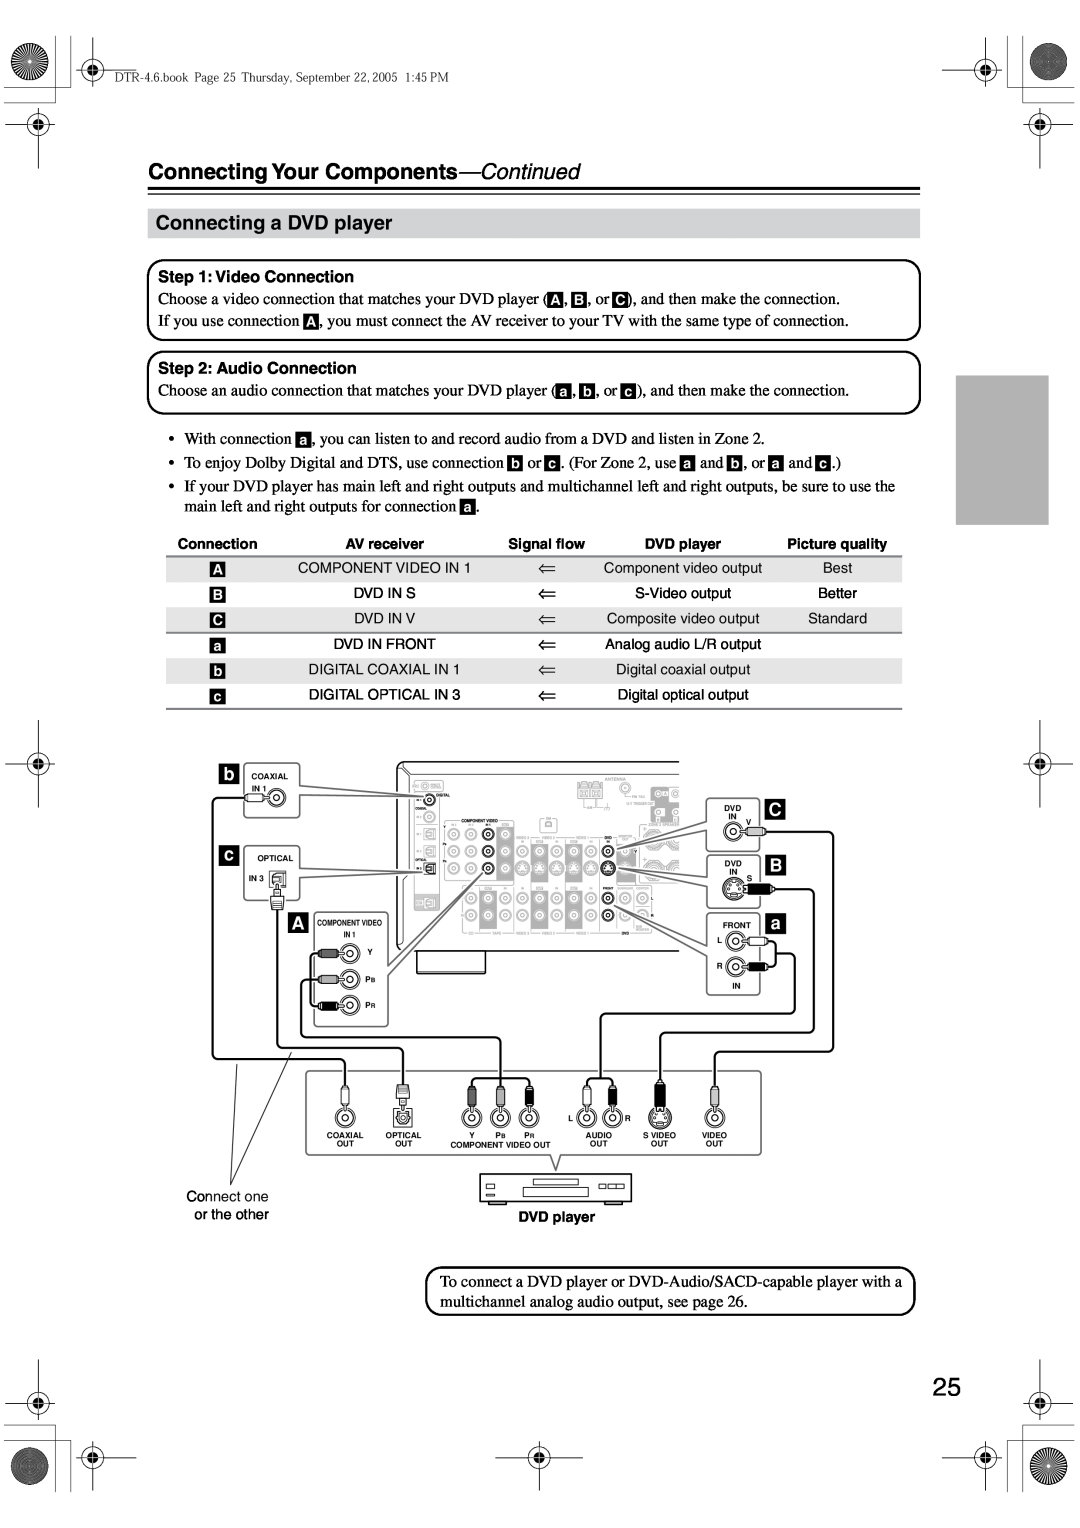 Integra DTR-4.6 instruction manual Connecting a DVD player, Connecting Your Components—Continued, C B a, or the other 